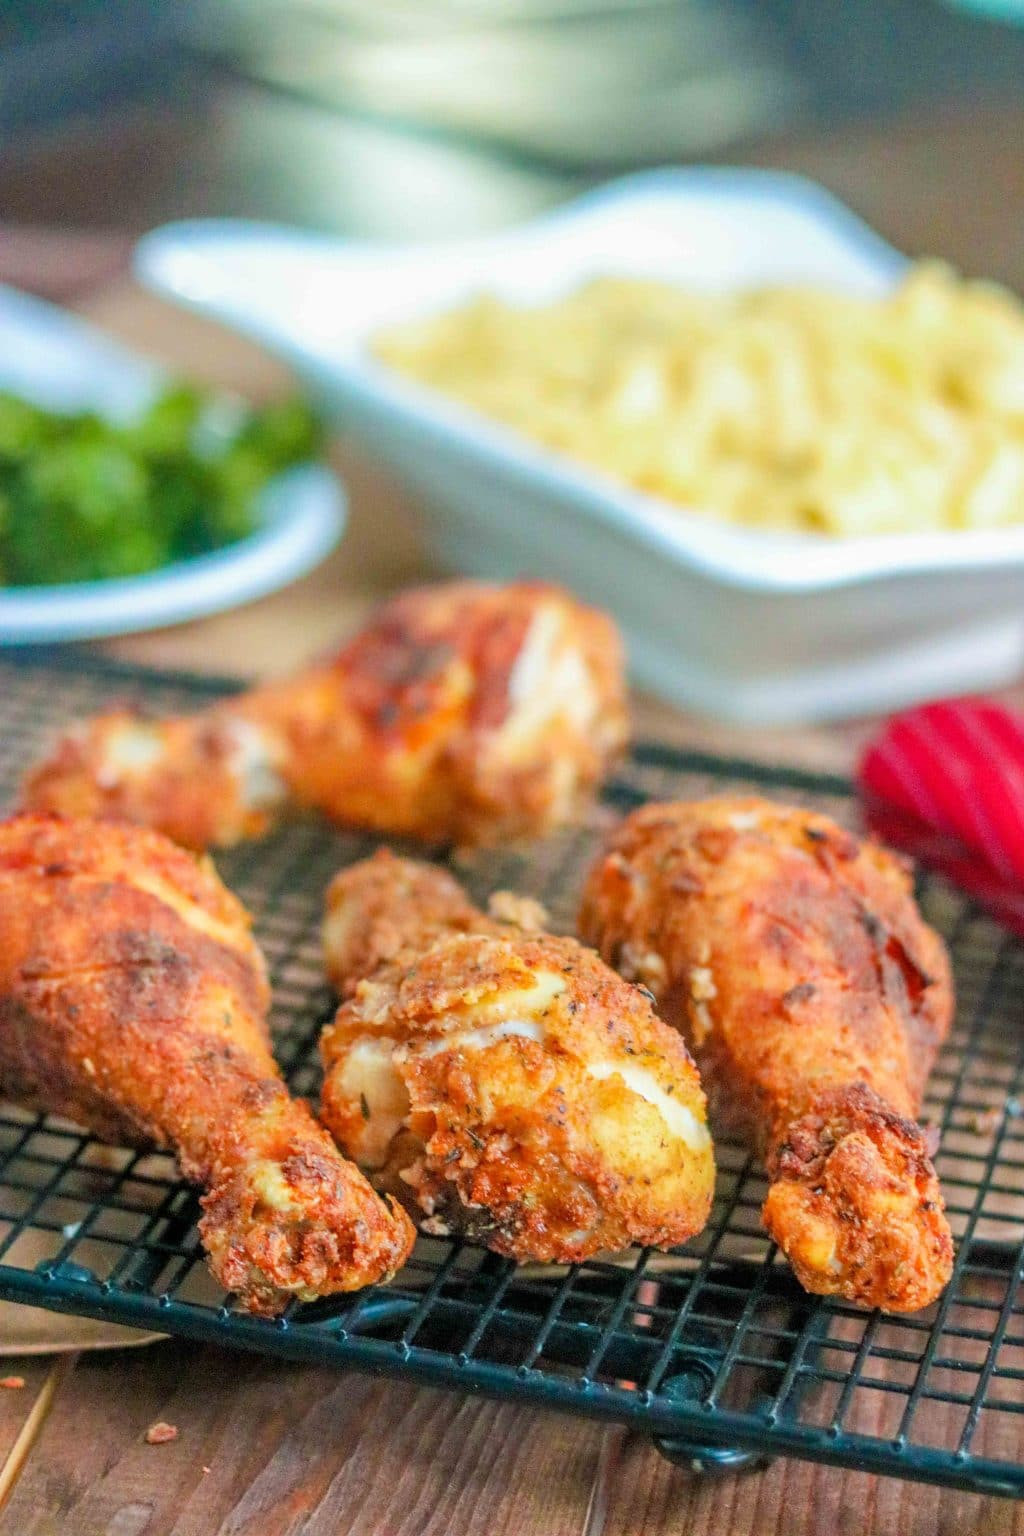 Fried Chicken In The Oven
 Oven Fried Chicken Recipe